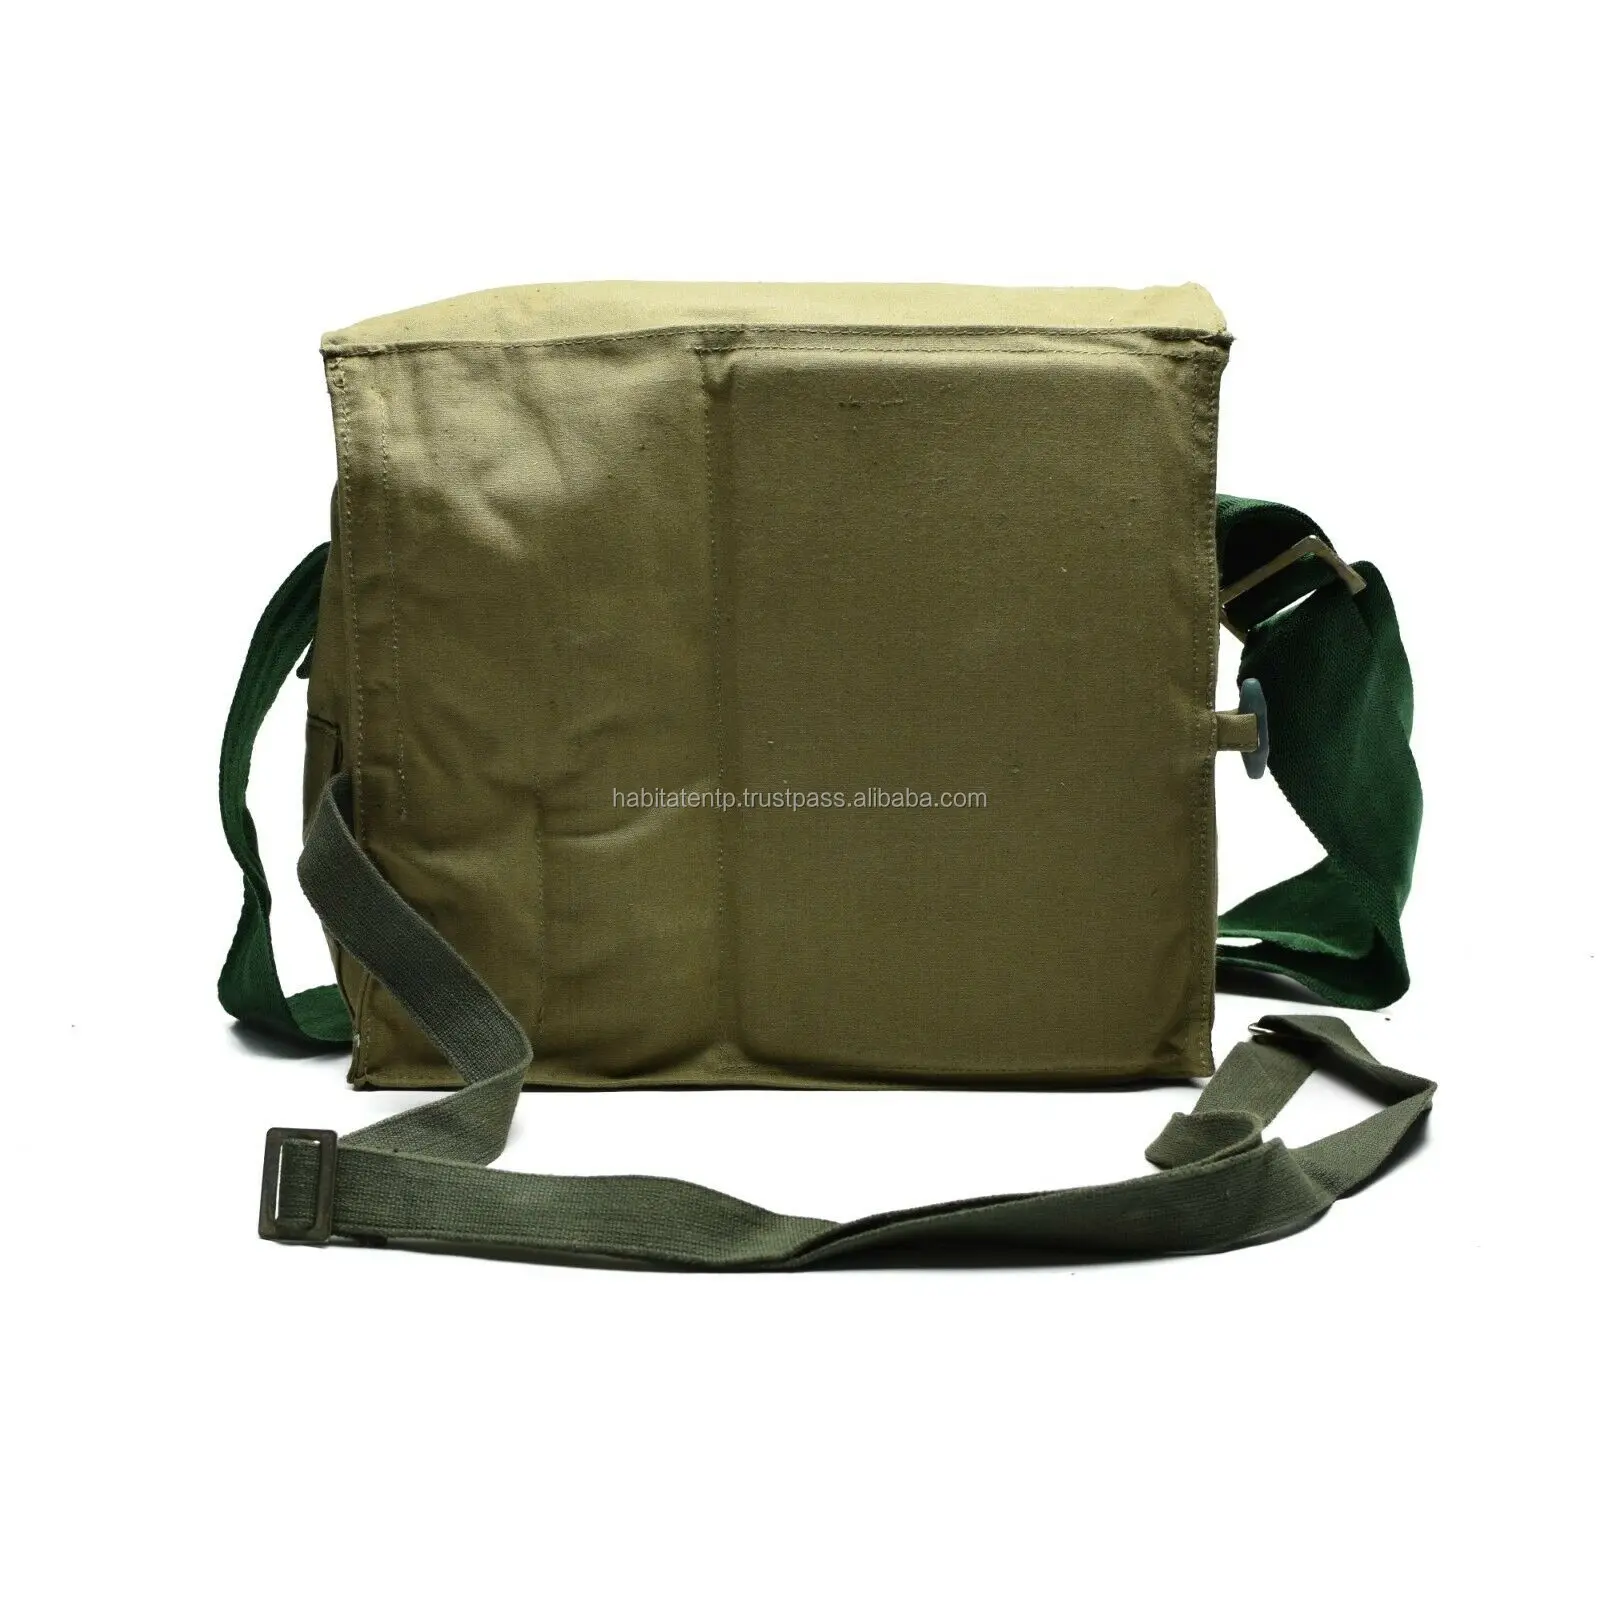 REPRODUCTION  MILITARY SHOULDER BAG KHAKI WITH PEACE SIGN 